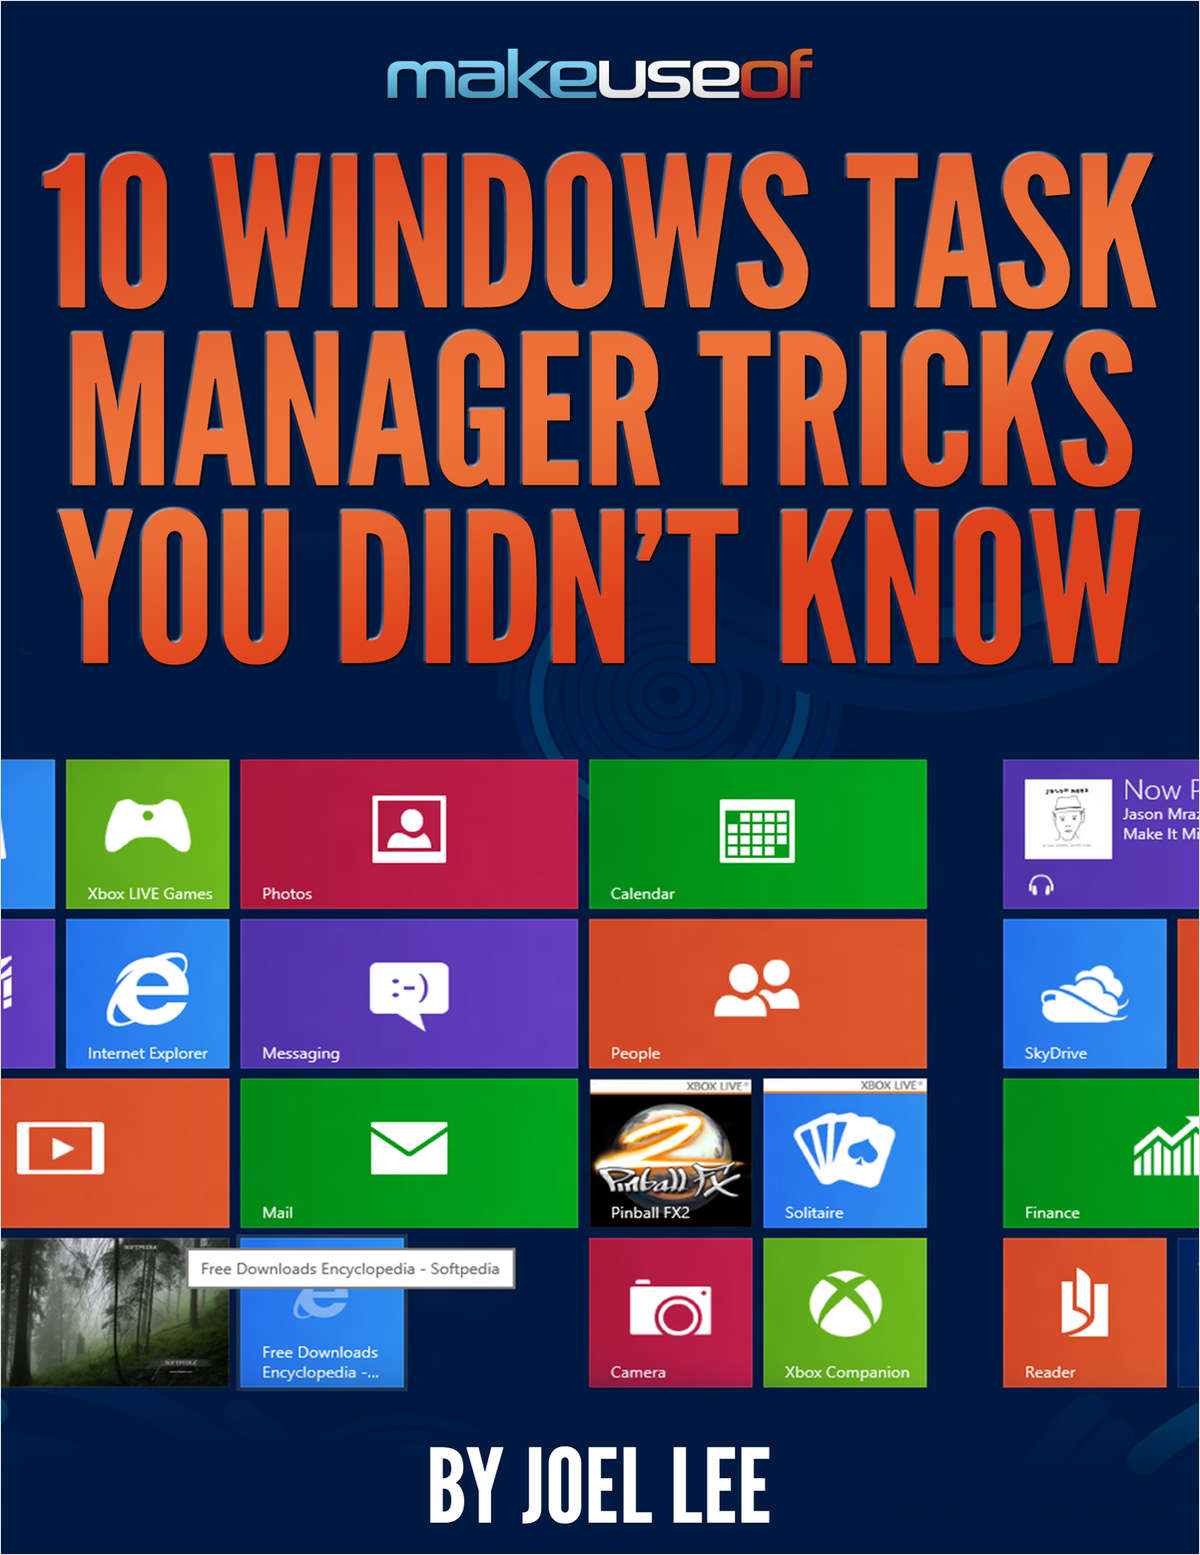 10 Windows Task Manager Tricks You Didn't Know